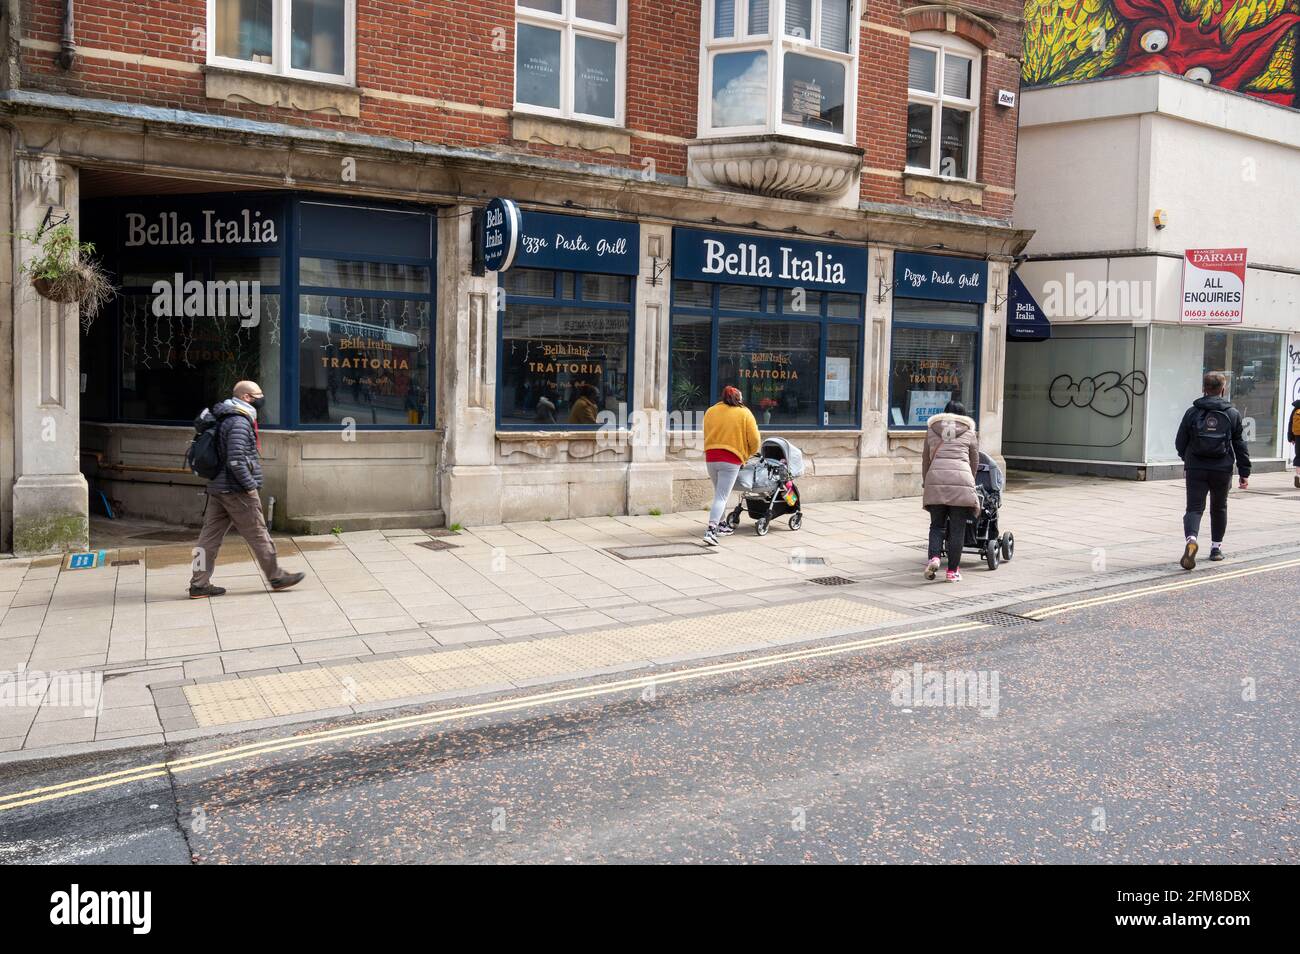 A view of Bella Italia restaurant on Red Lion Street Norwich city centre Stock Photo